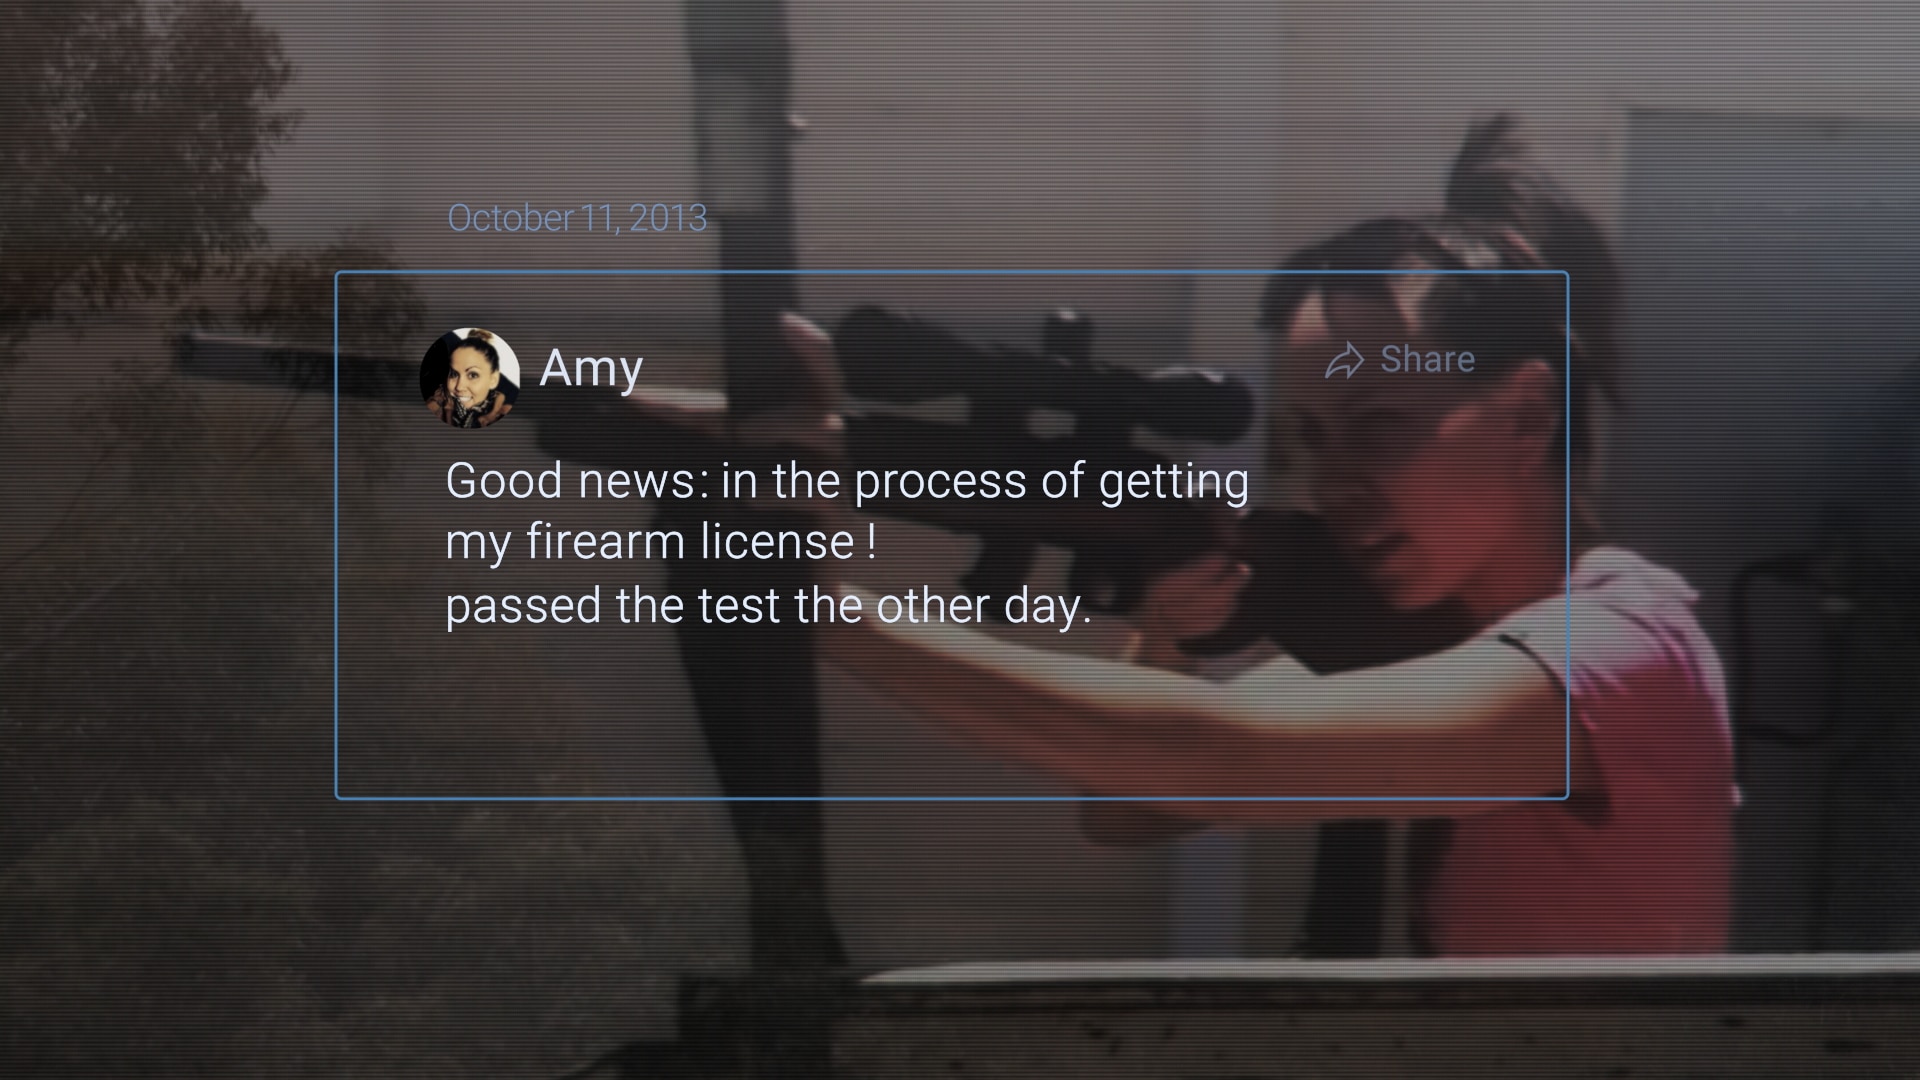 Text messagte recreated over an image of a woman in a pink top holding a shotgun